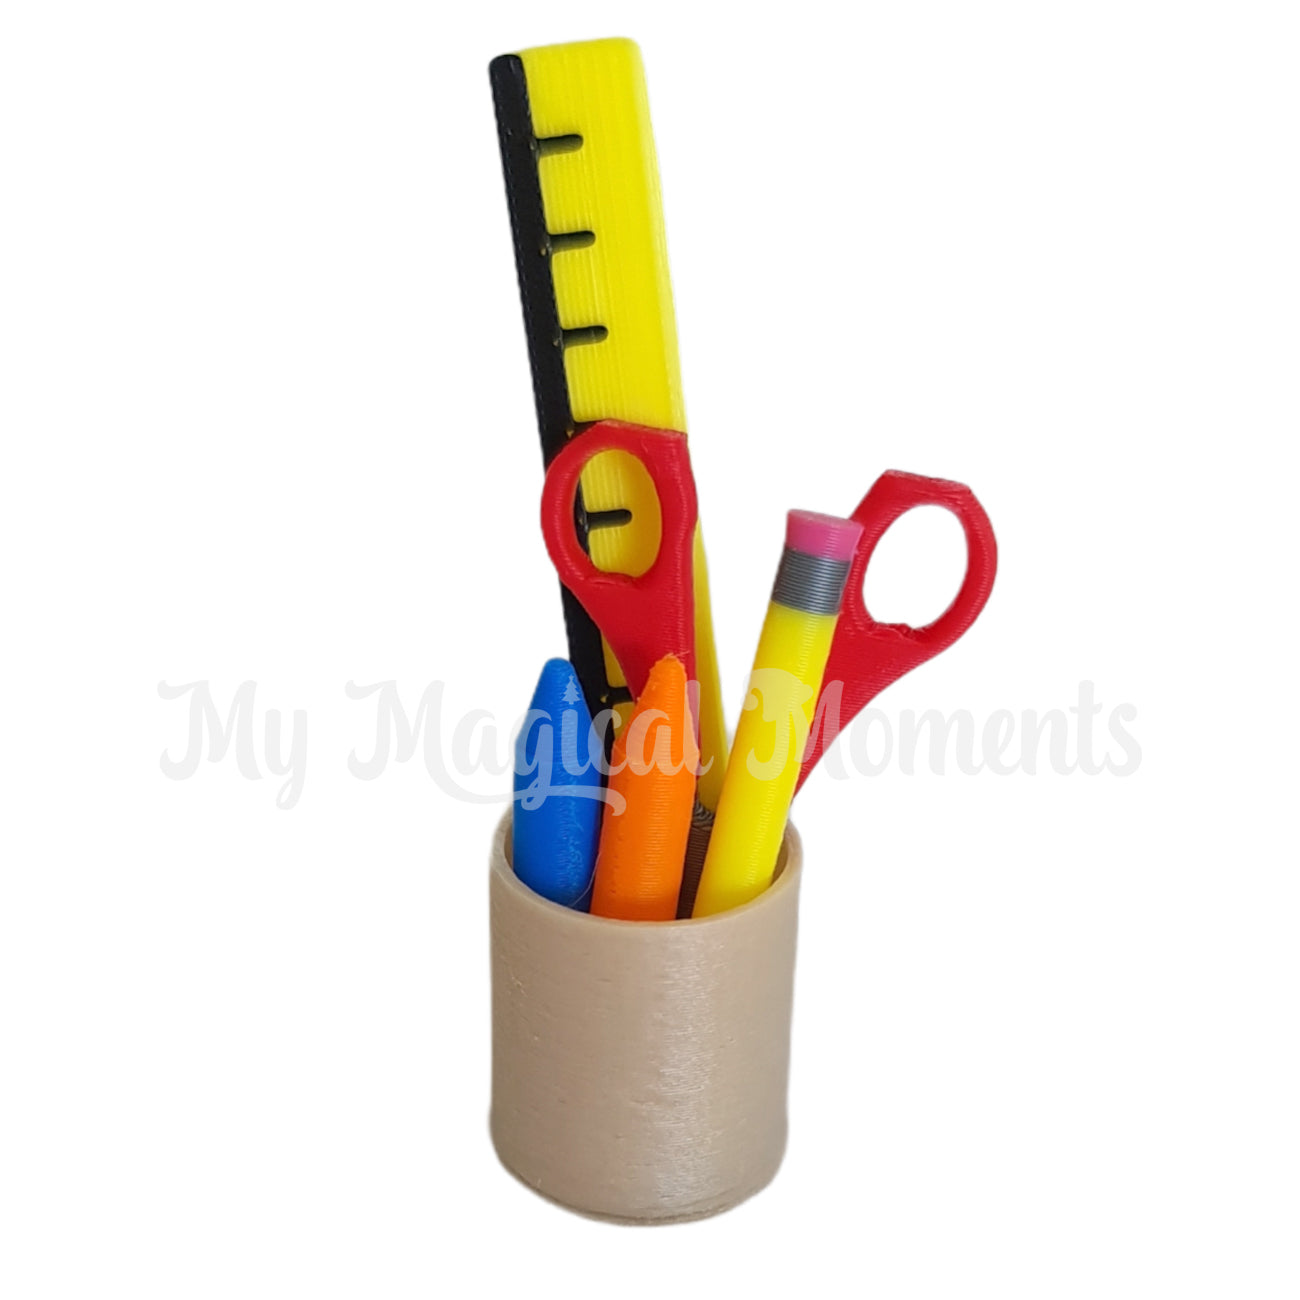 Miniature elf stationery set. Cup holder with a ruler, red handled scissors, pencil and crayons